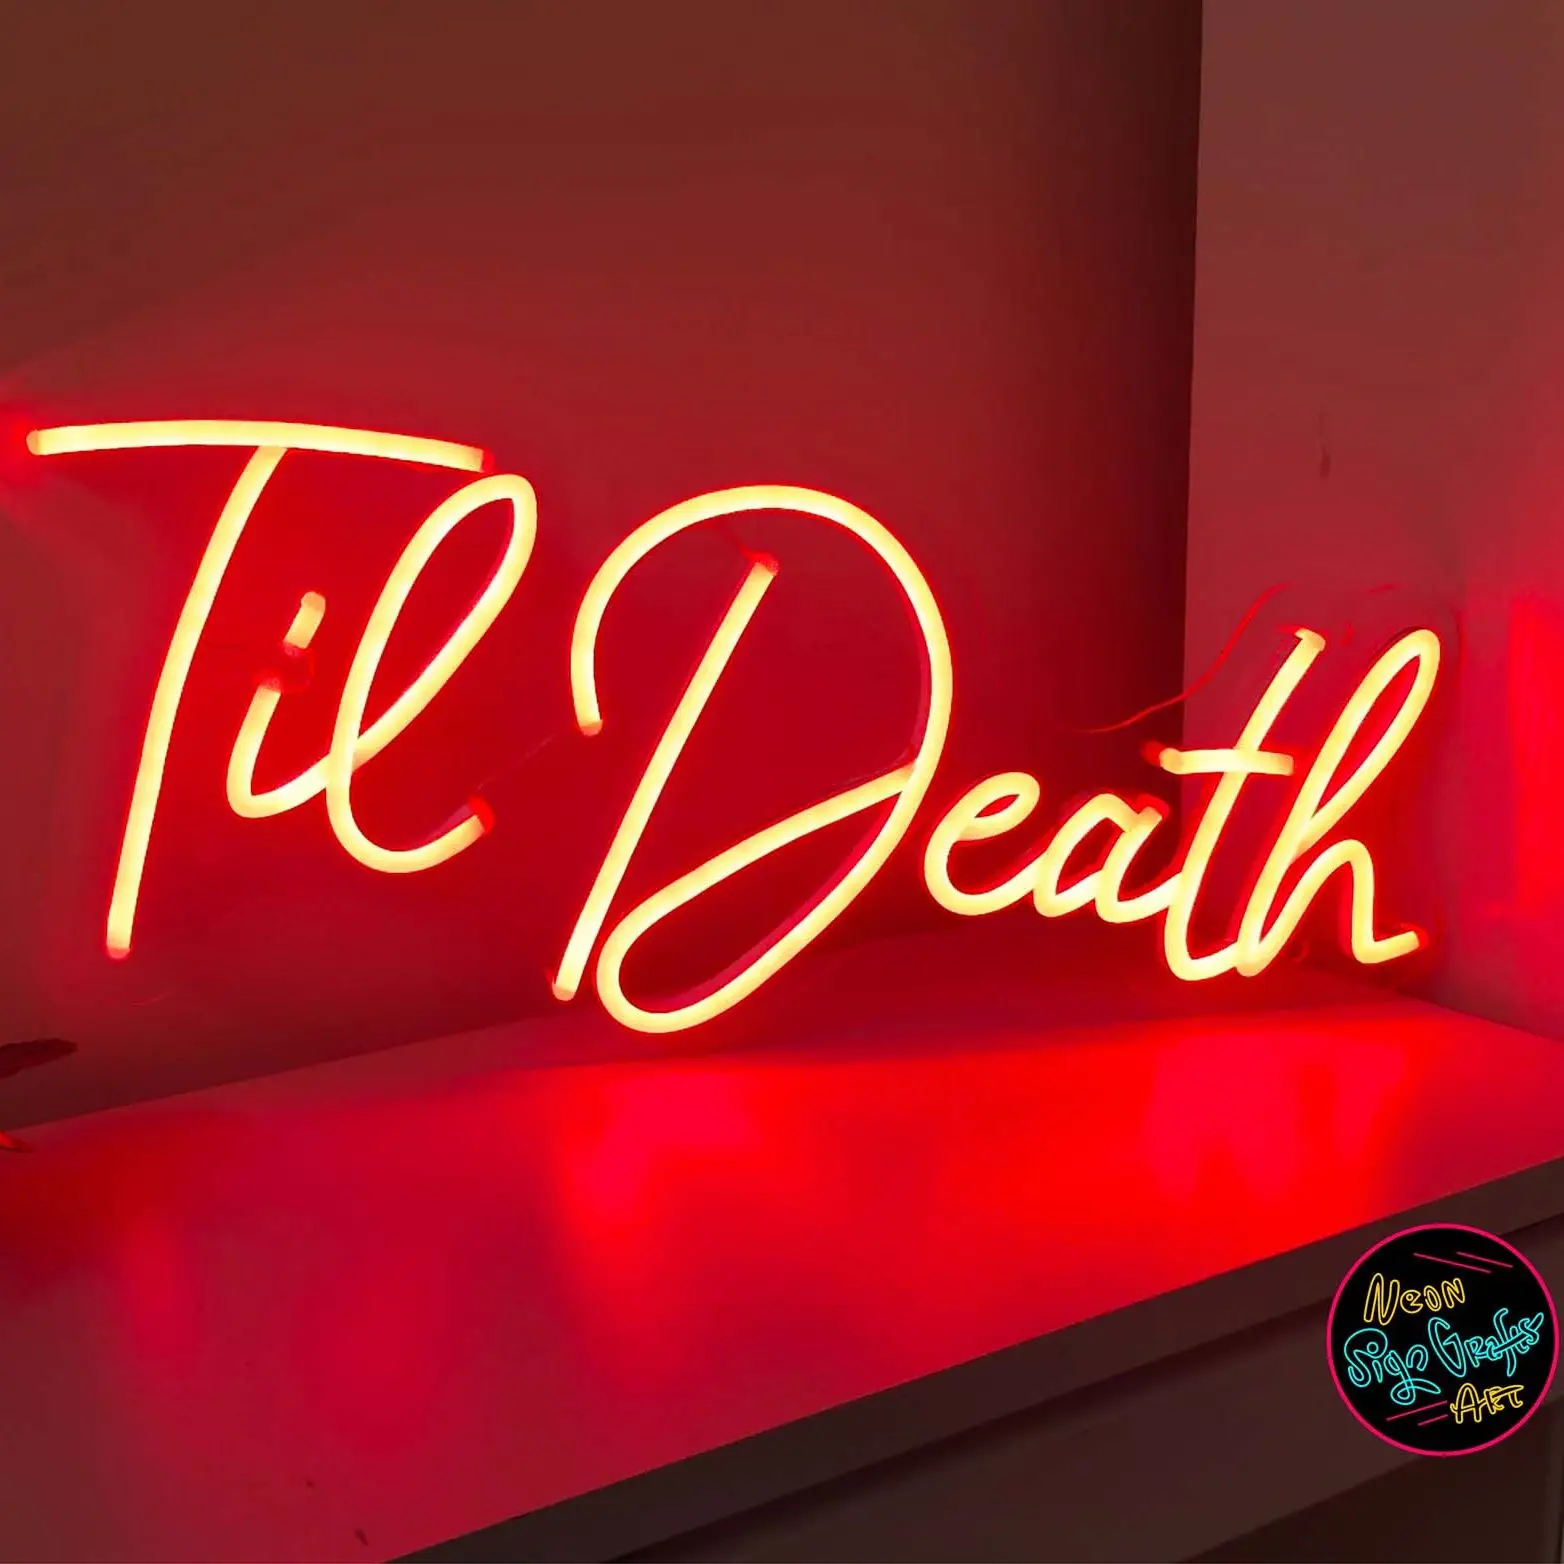 Til Death Wedding LED Neon Light Signs for Room/Bar Decor,Birthday Gifts,Party Hanging,with Different Custom Size